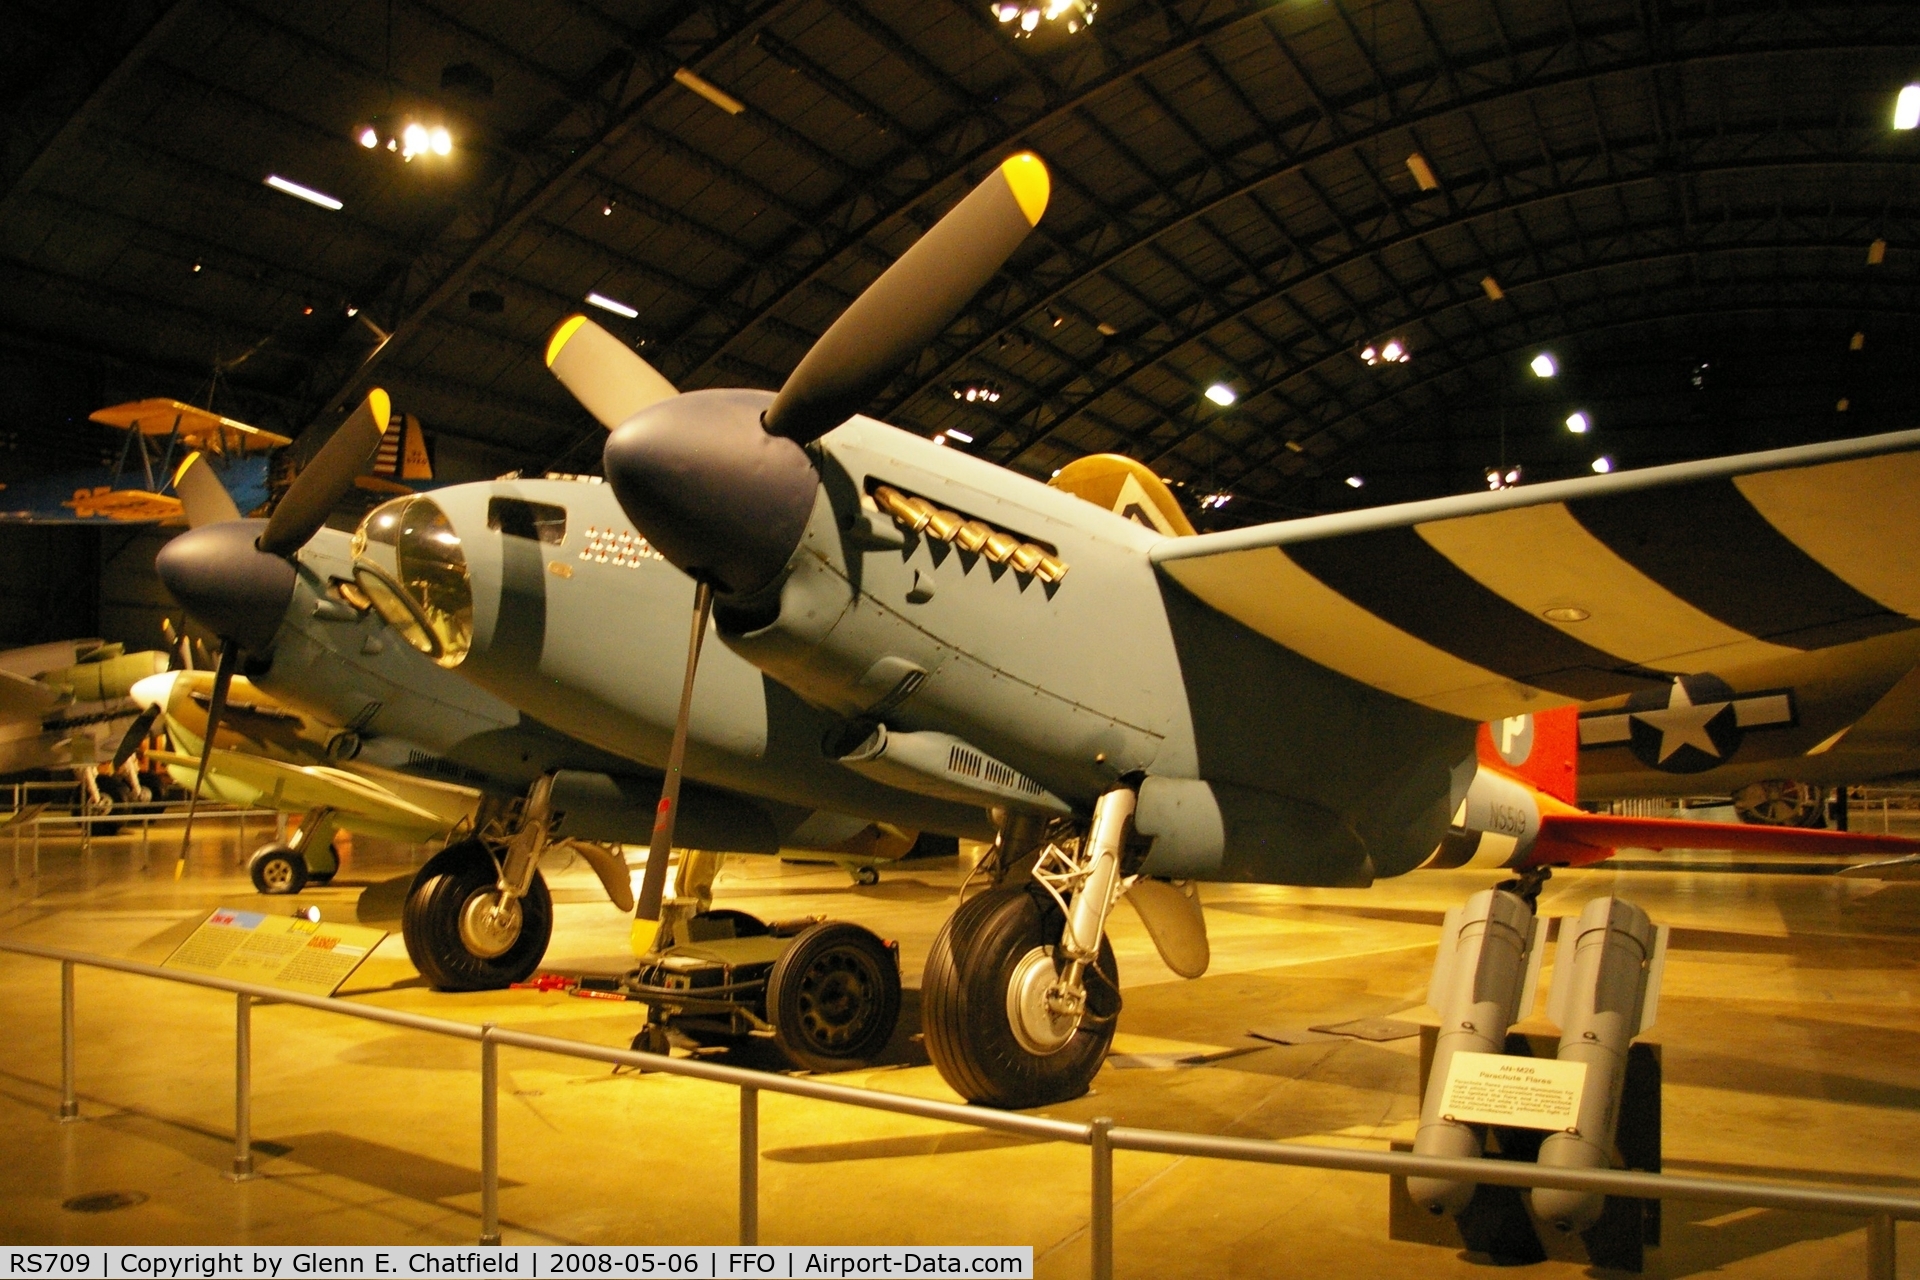 RS709, 1946 De Havilland DH-98 Mosquito B Mk.35 C/N Not found, Displayed at the National Museum of the U.S. Air Force